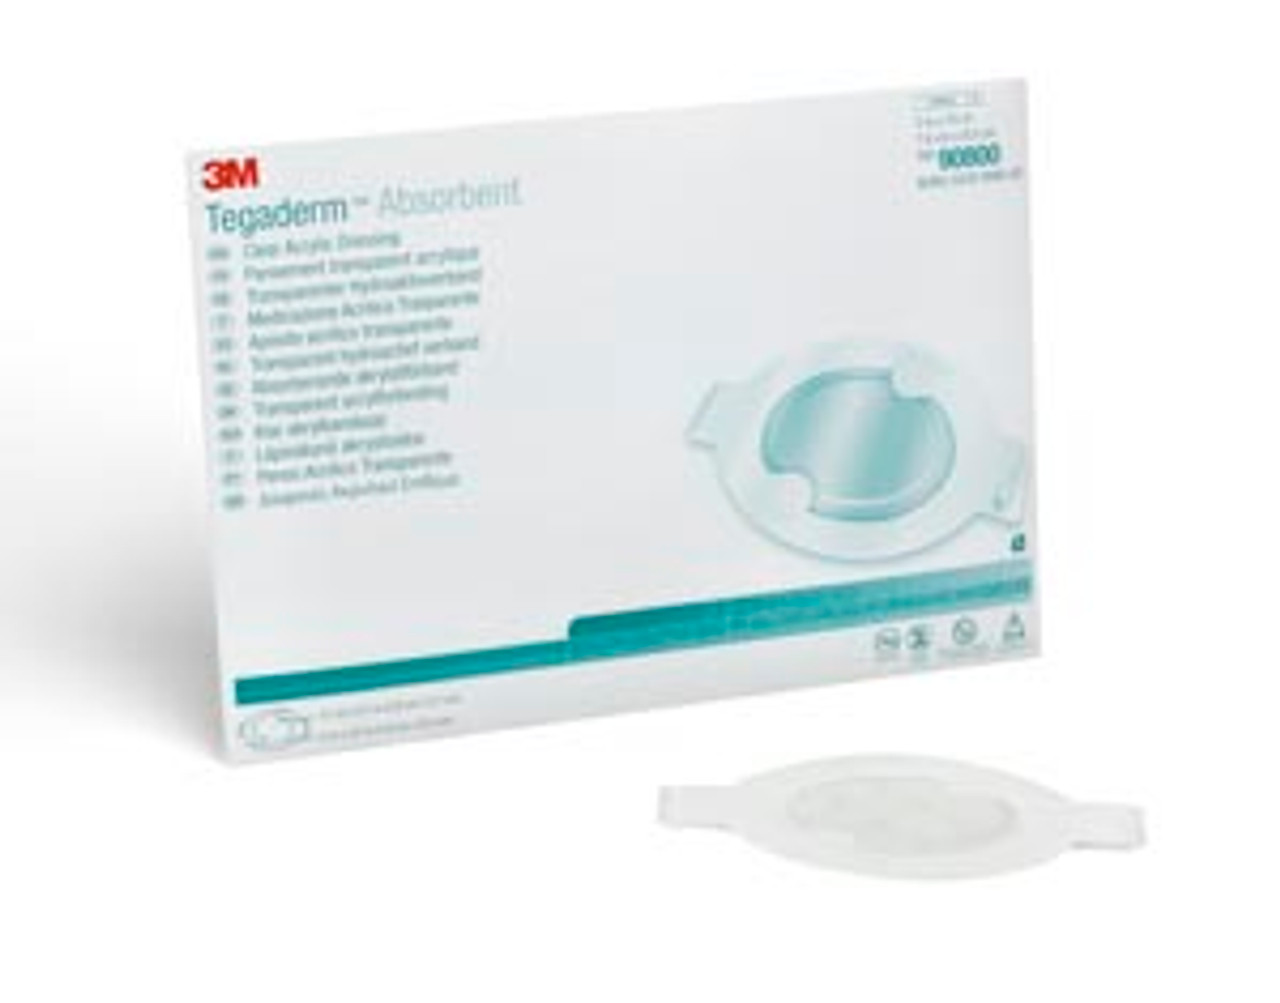 3M TEGADERM ABSORBENT CLEAR ACRYLIC DRESSINGS, 90800